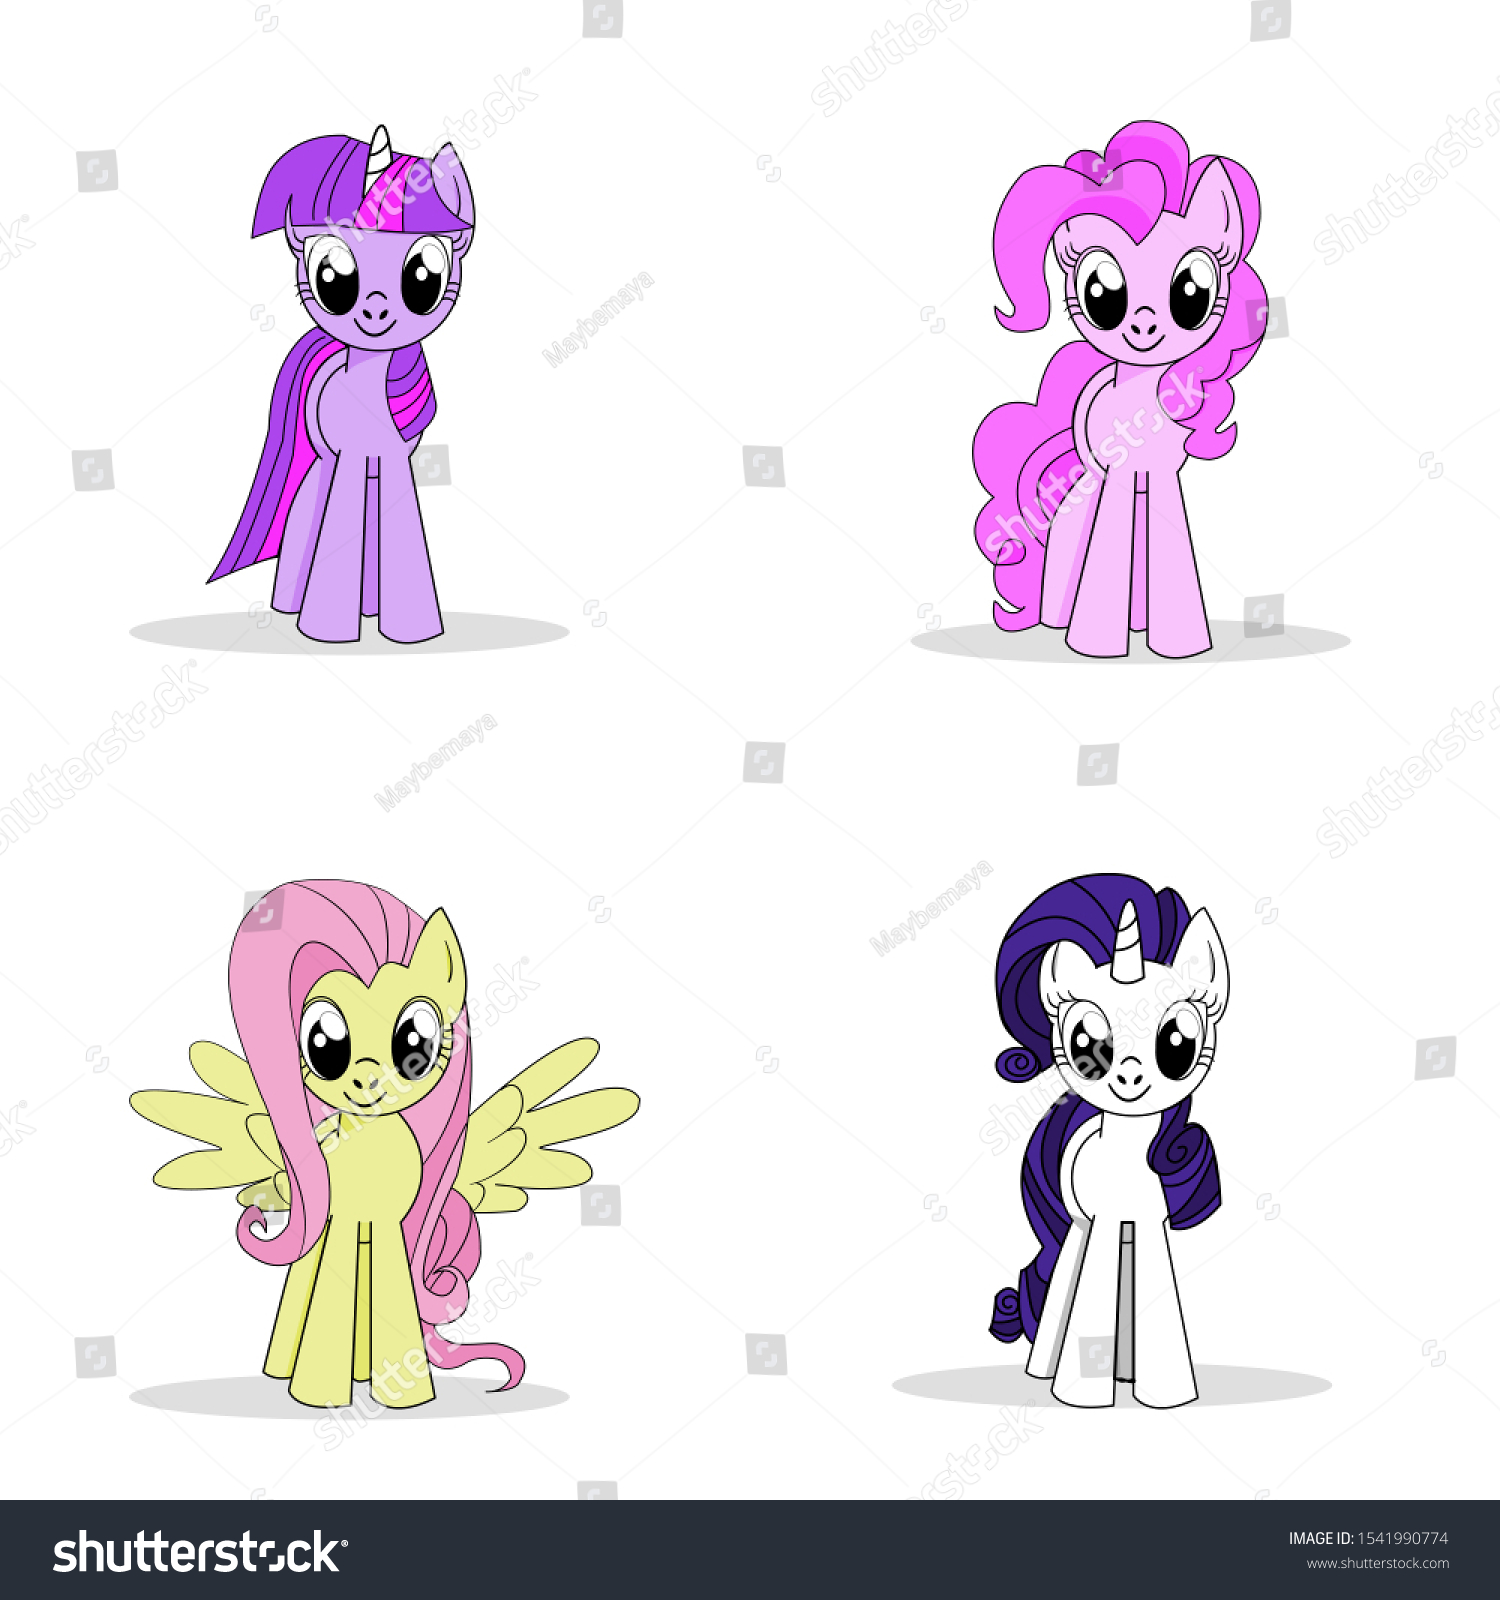 SVG of Set of colorful little cute hand drawn cartoon character pony unicorn isolated on white background. My little pony friendship. svg